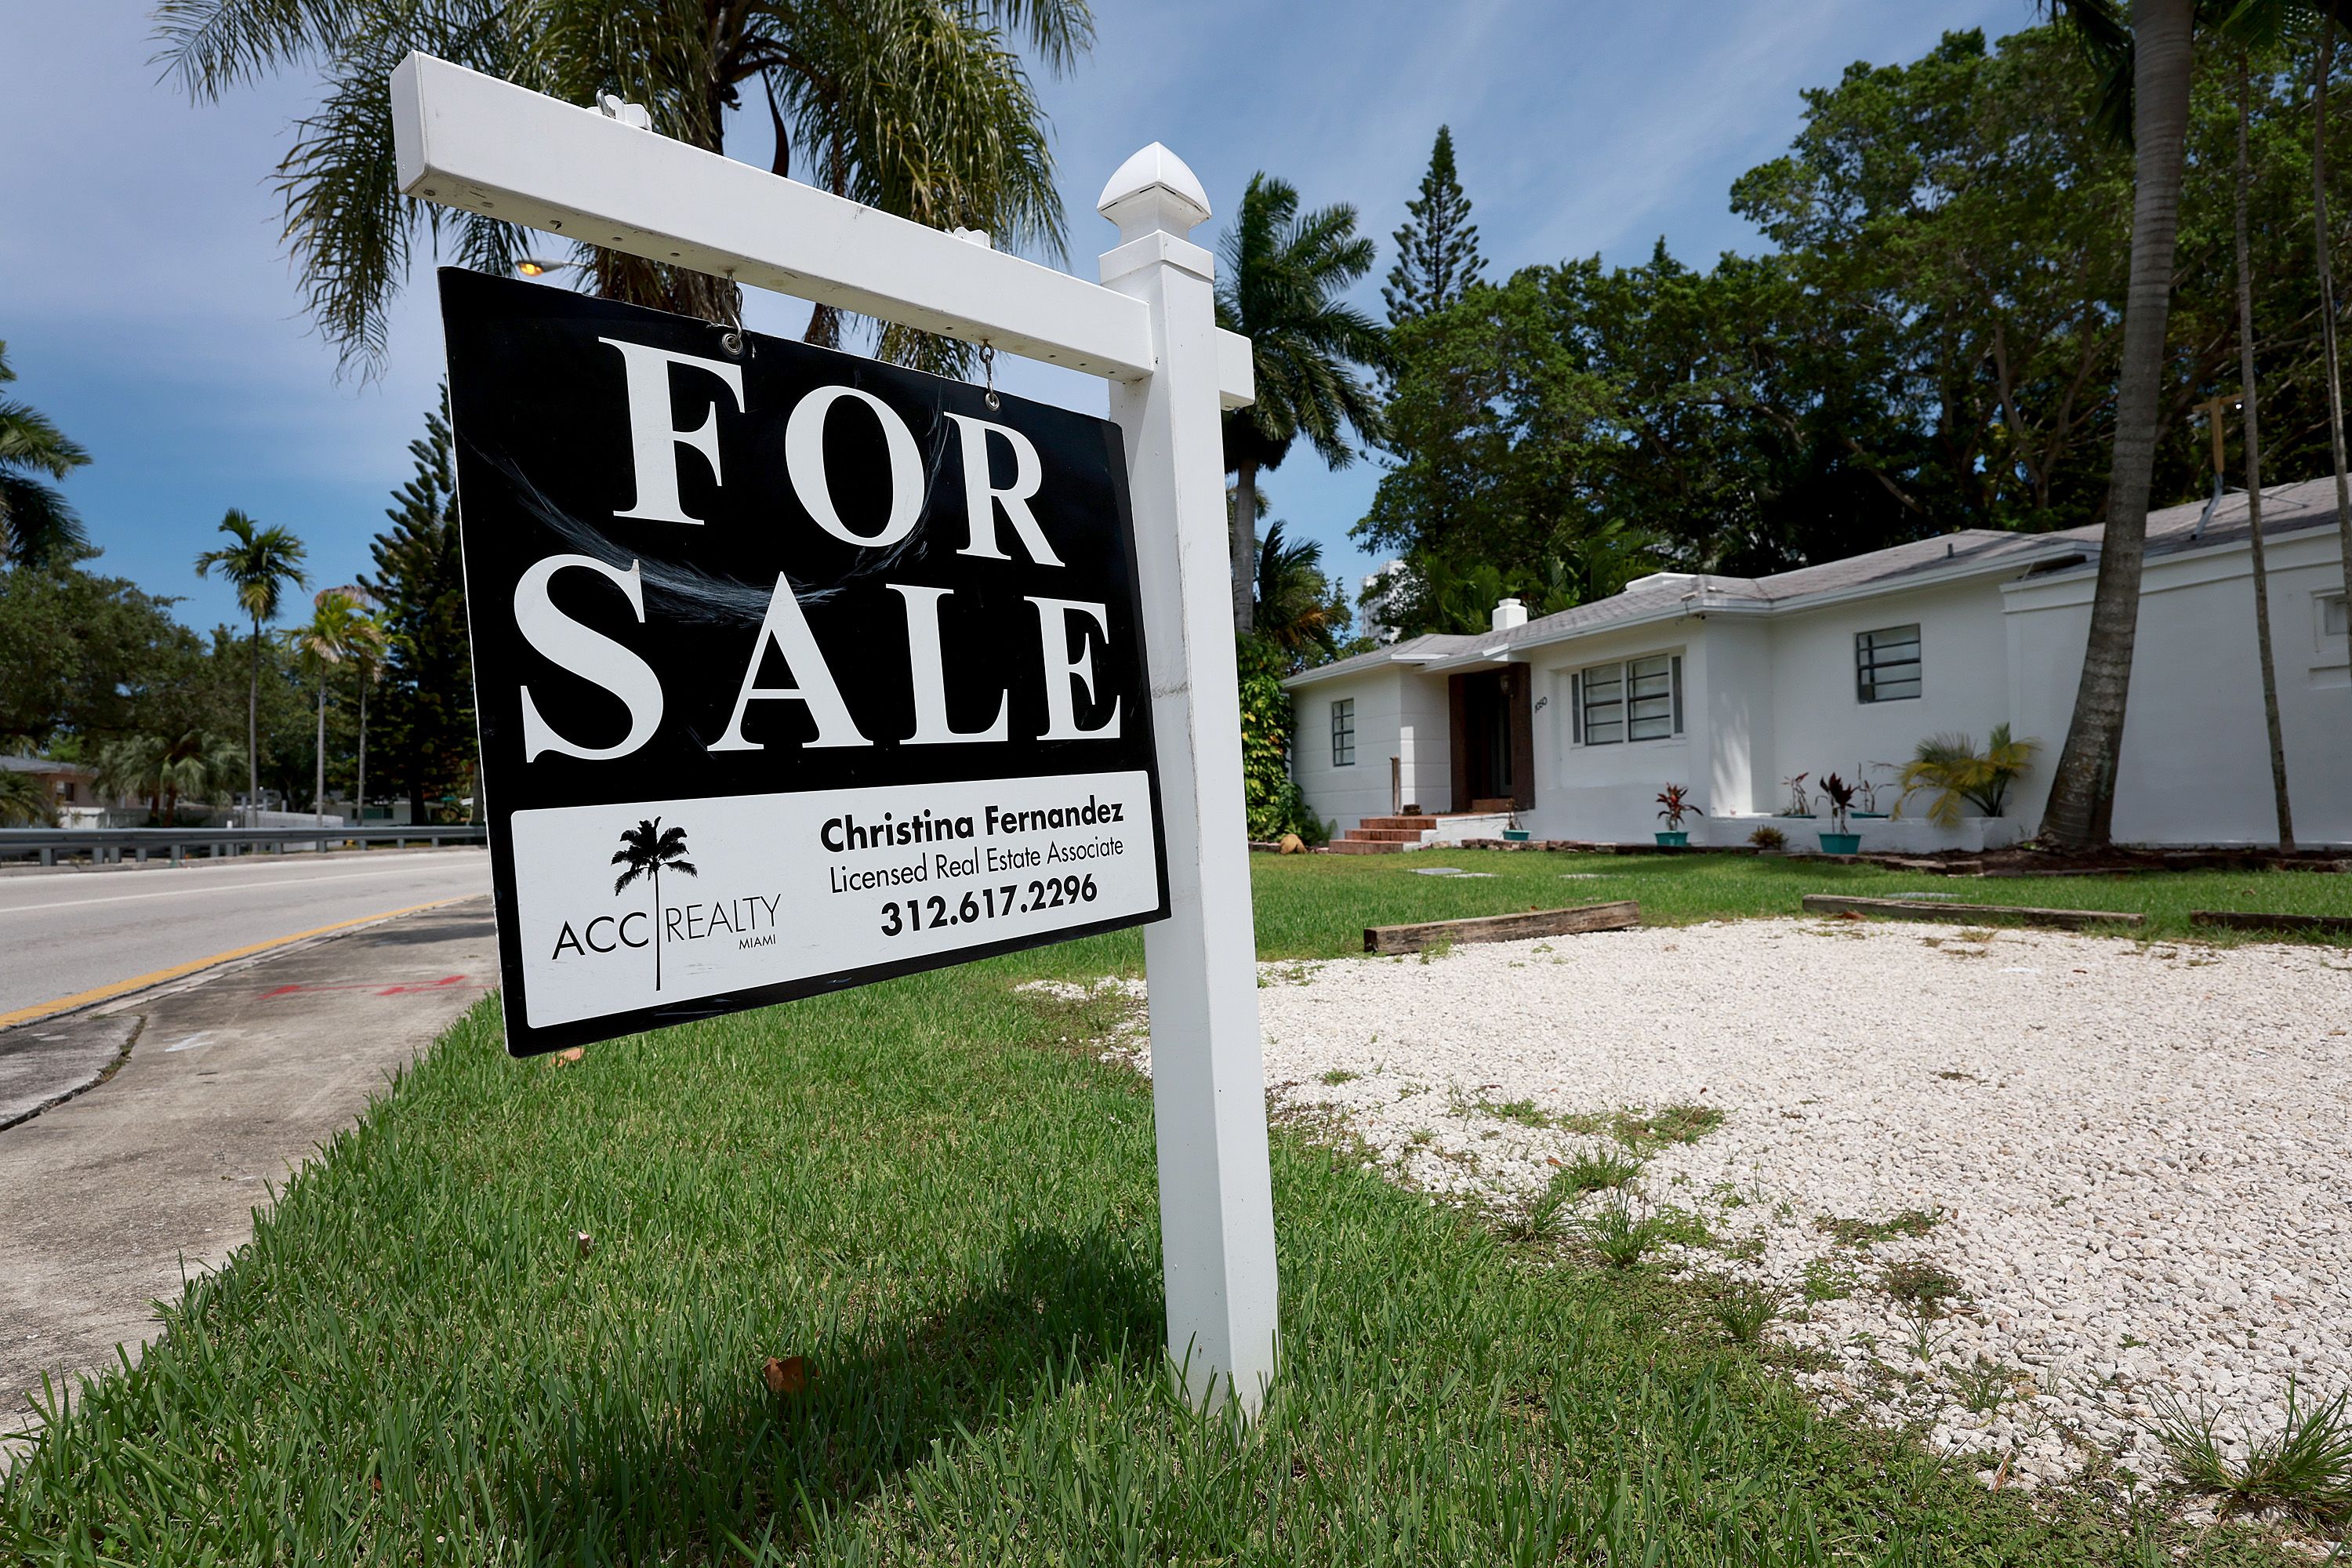 Opinion: The housing market is slowing down, but homes aren't getting  cheaper anytime soon